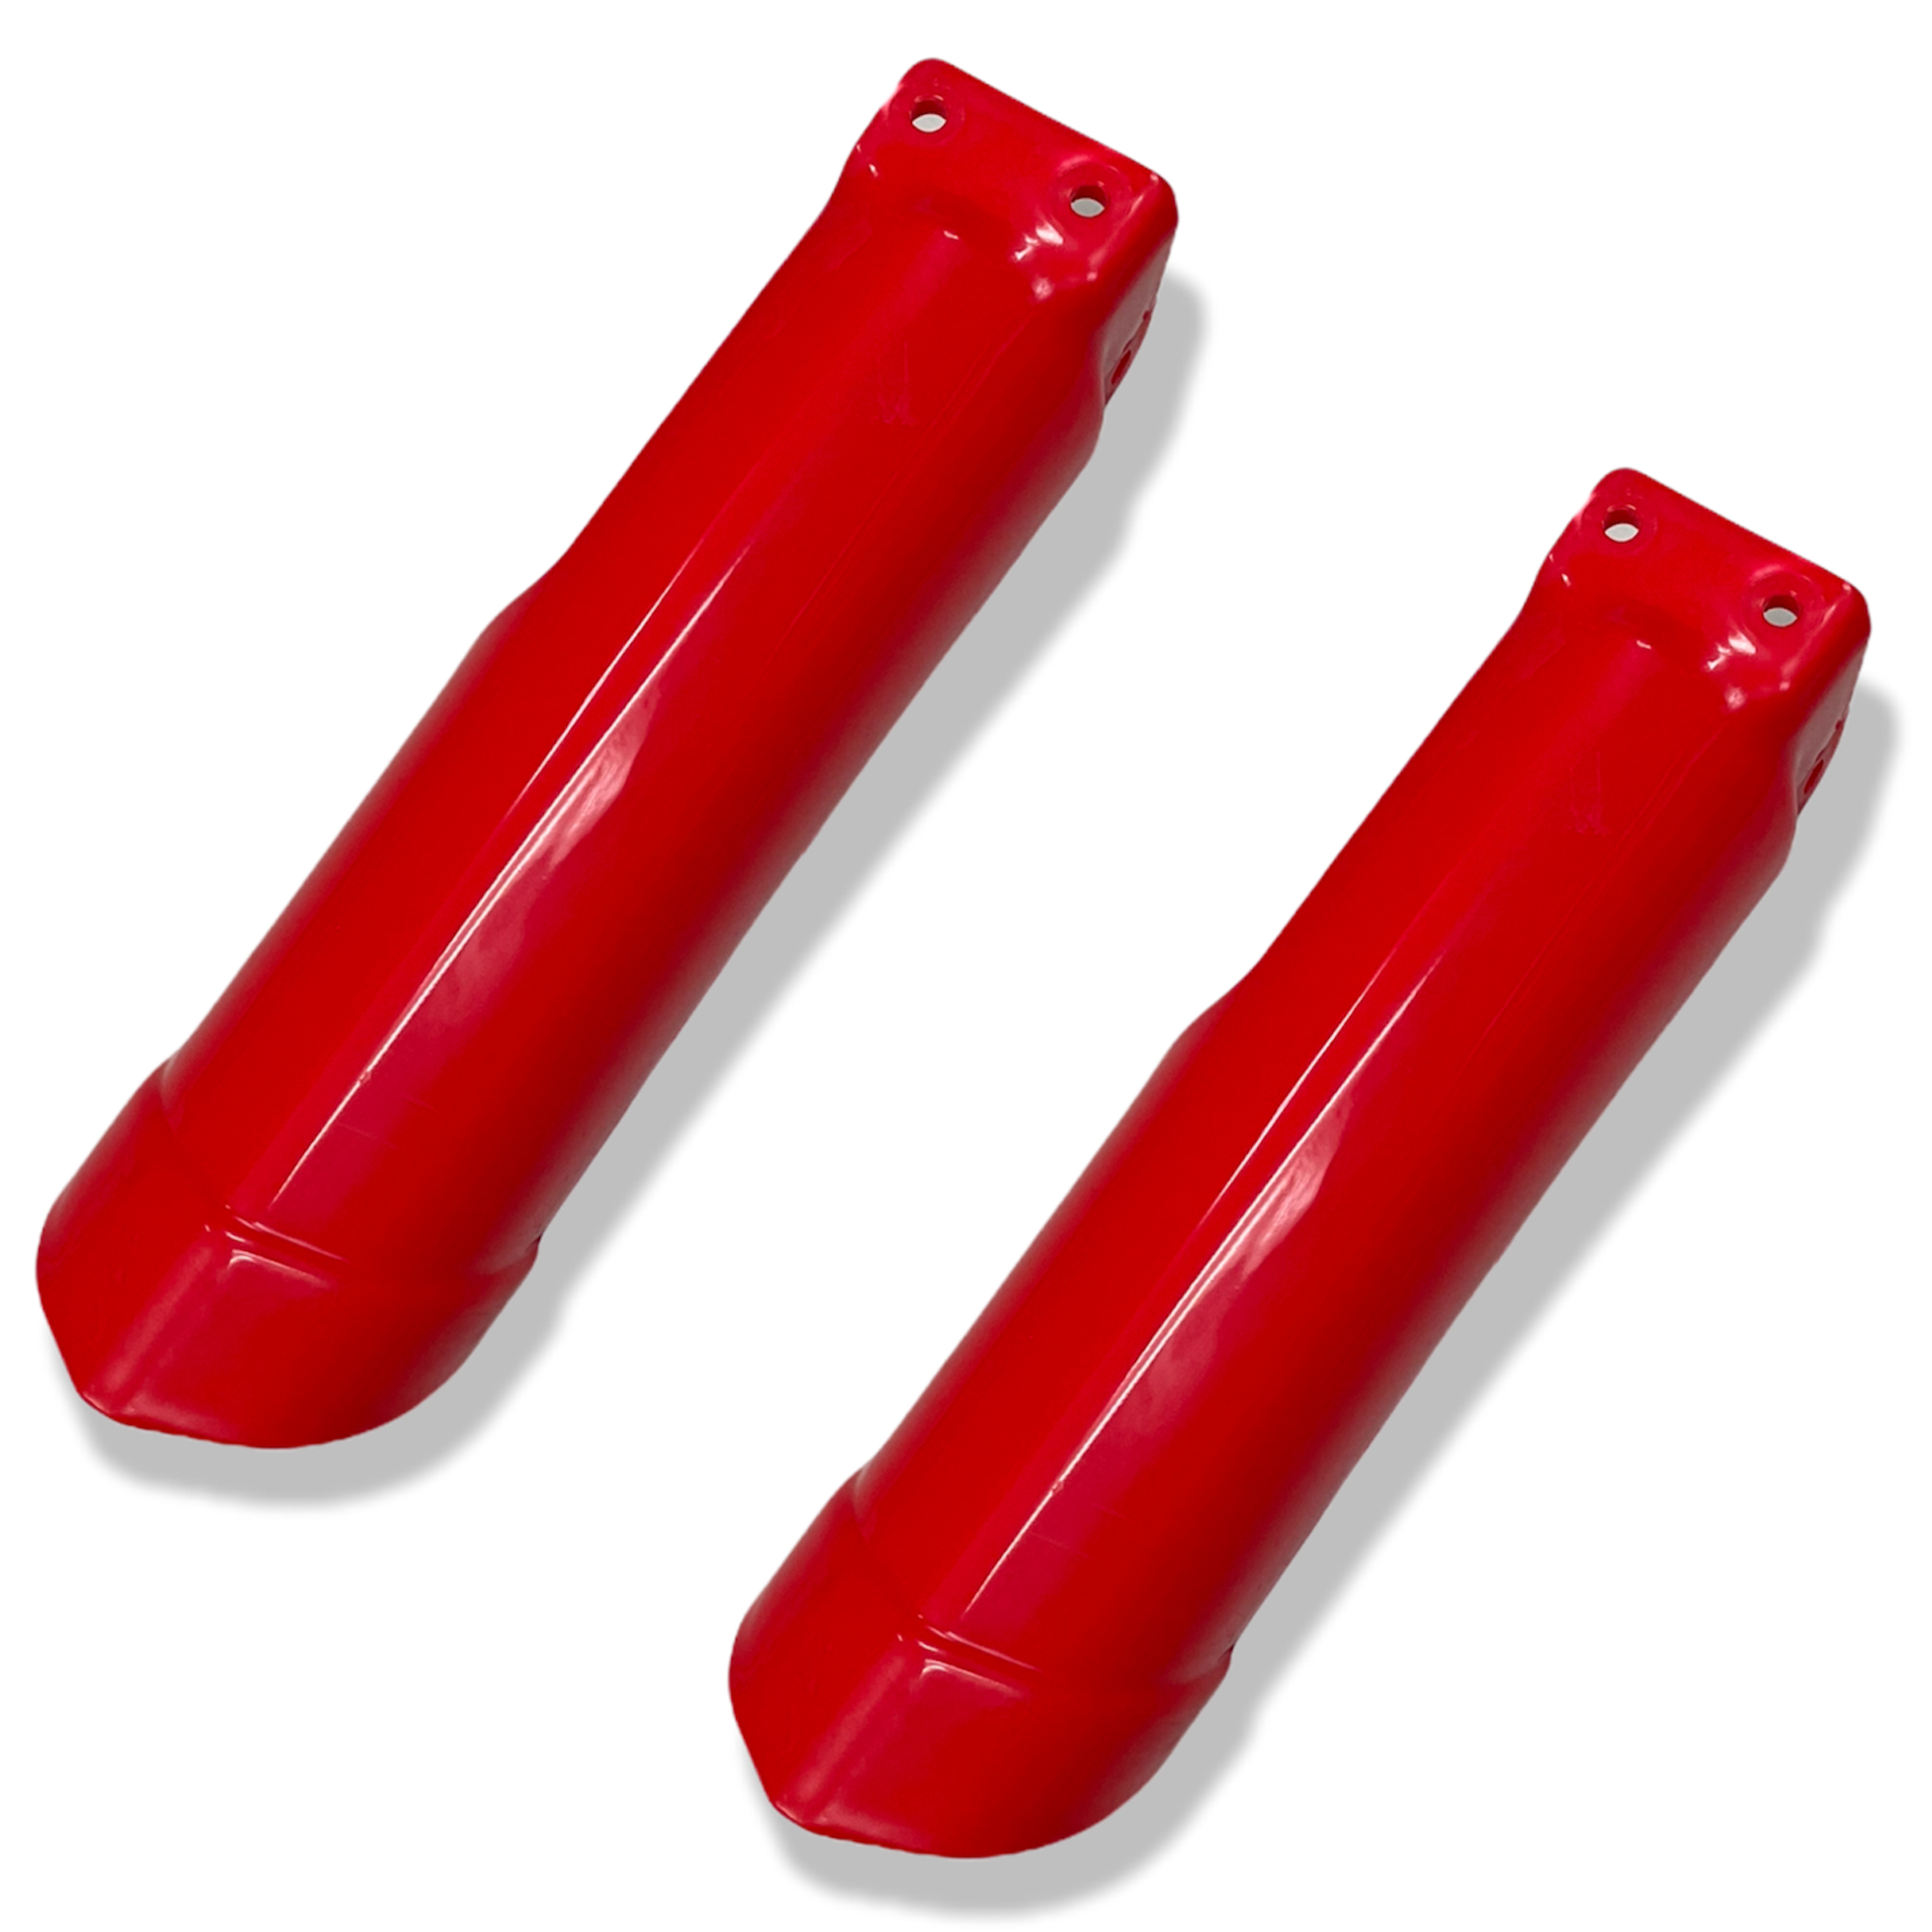 RED FRONT FORK COVER MINI (2PCS)